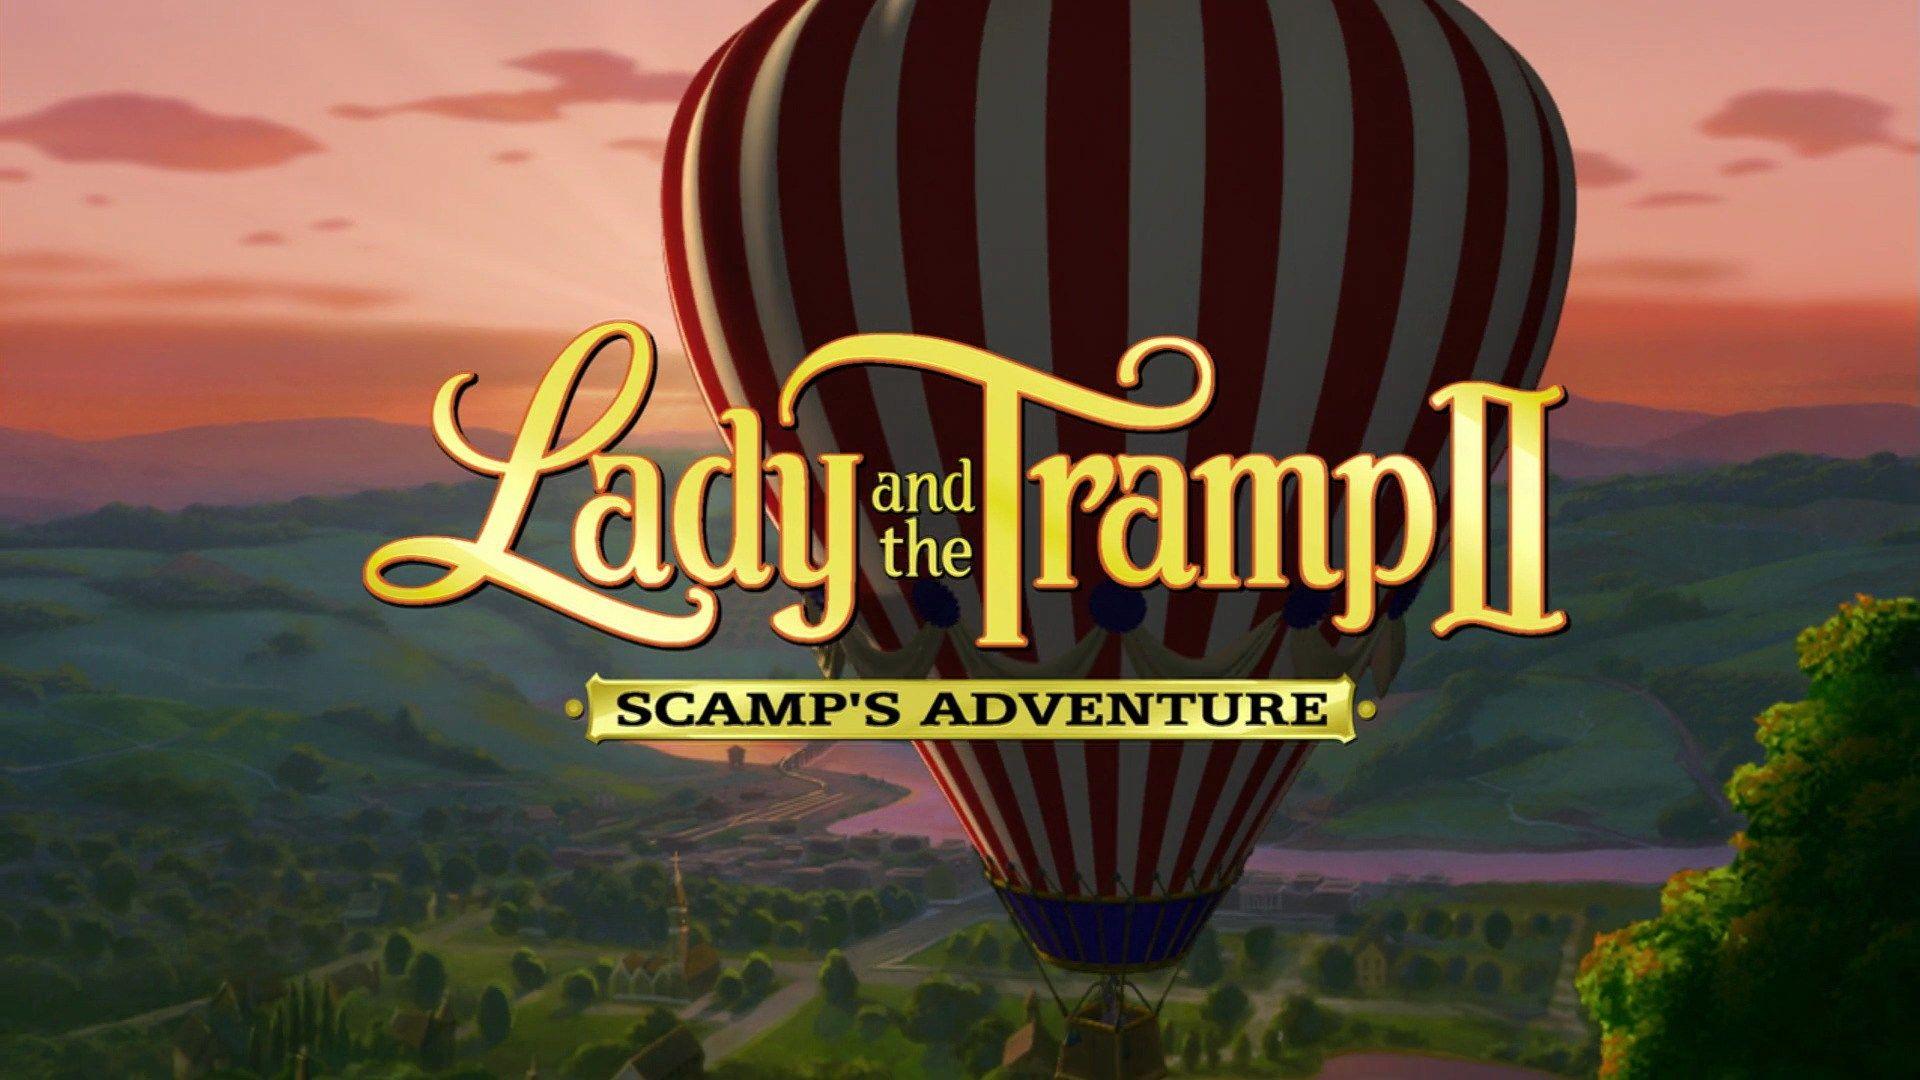 Lady and the Tramp Logo - Image - Lady and the Tramp 2 - Scamp's Adventure Logo.jpg | Film and ...